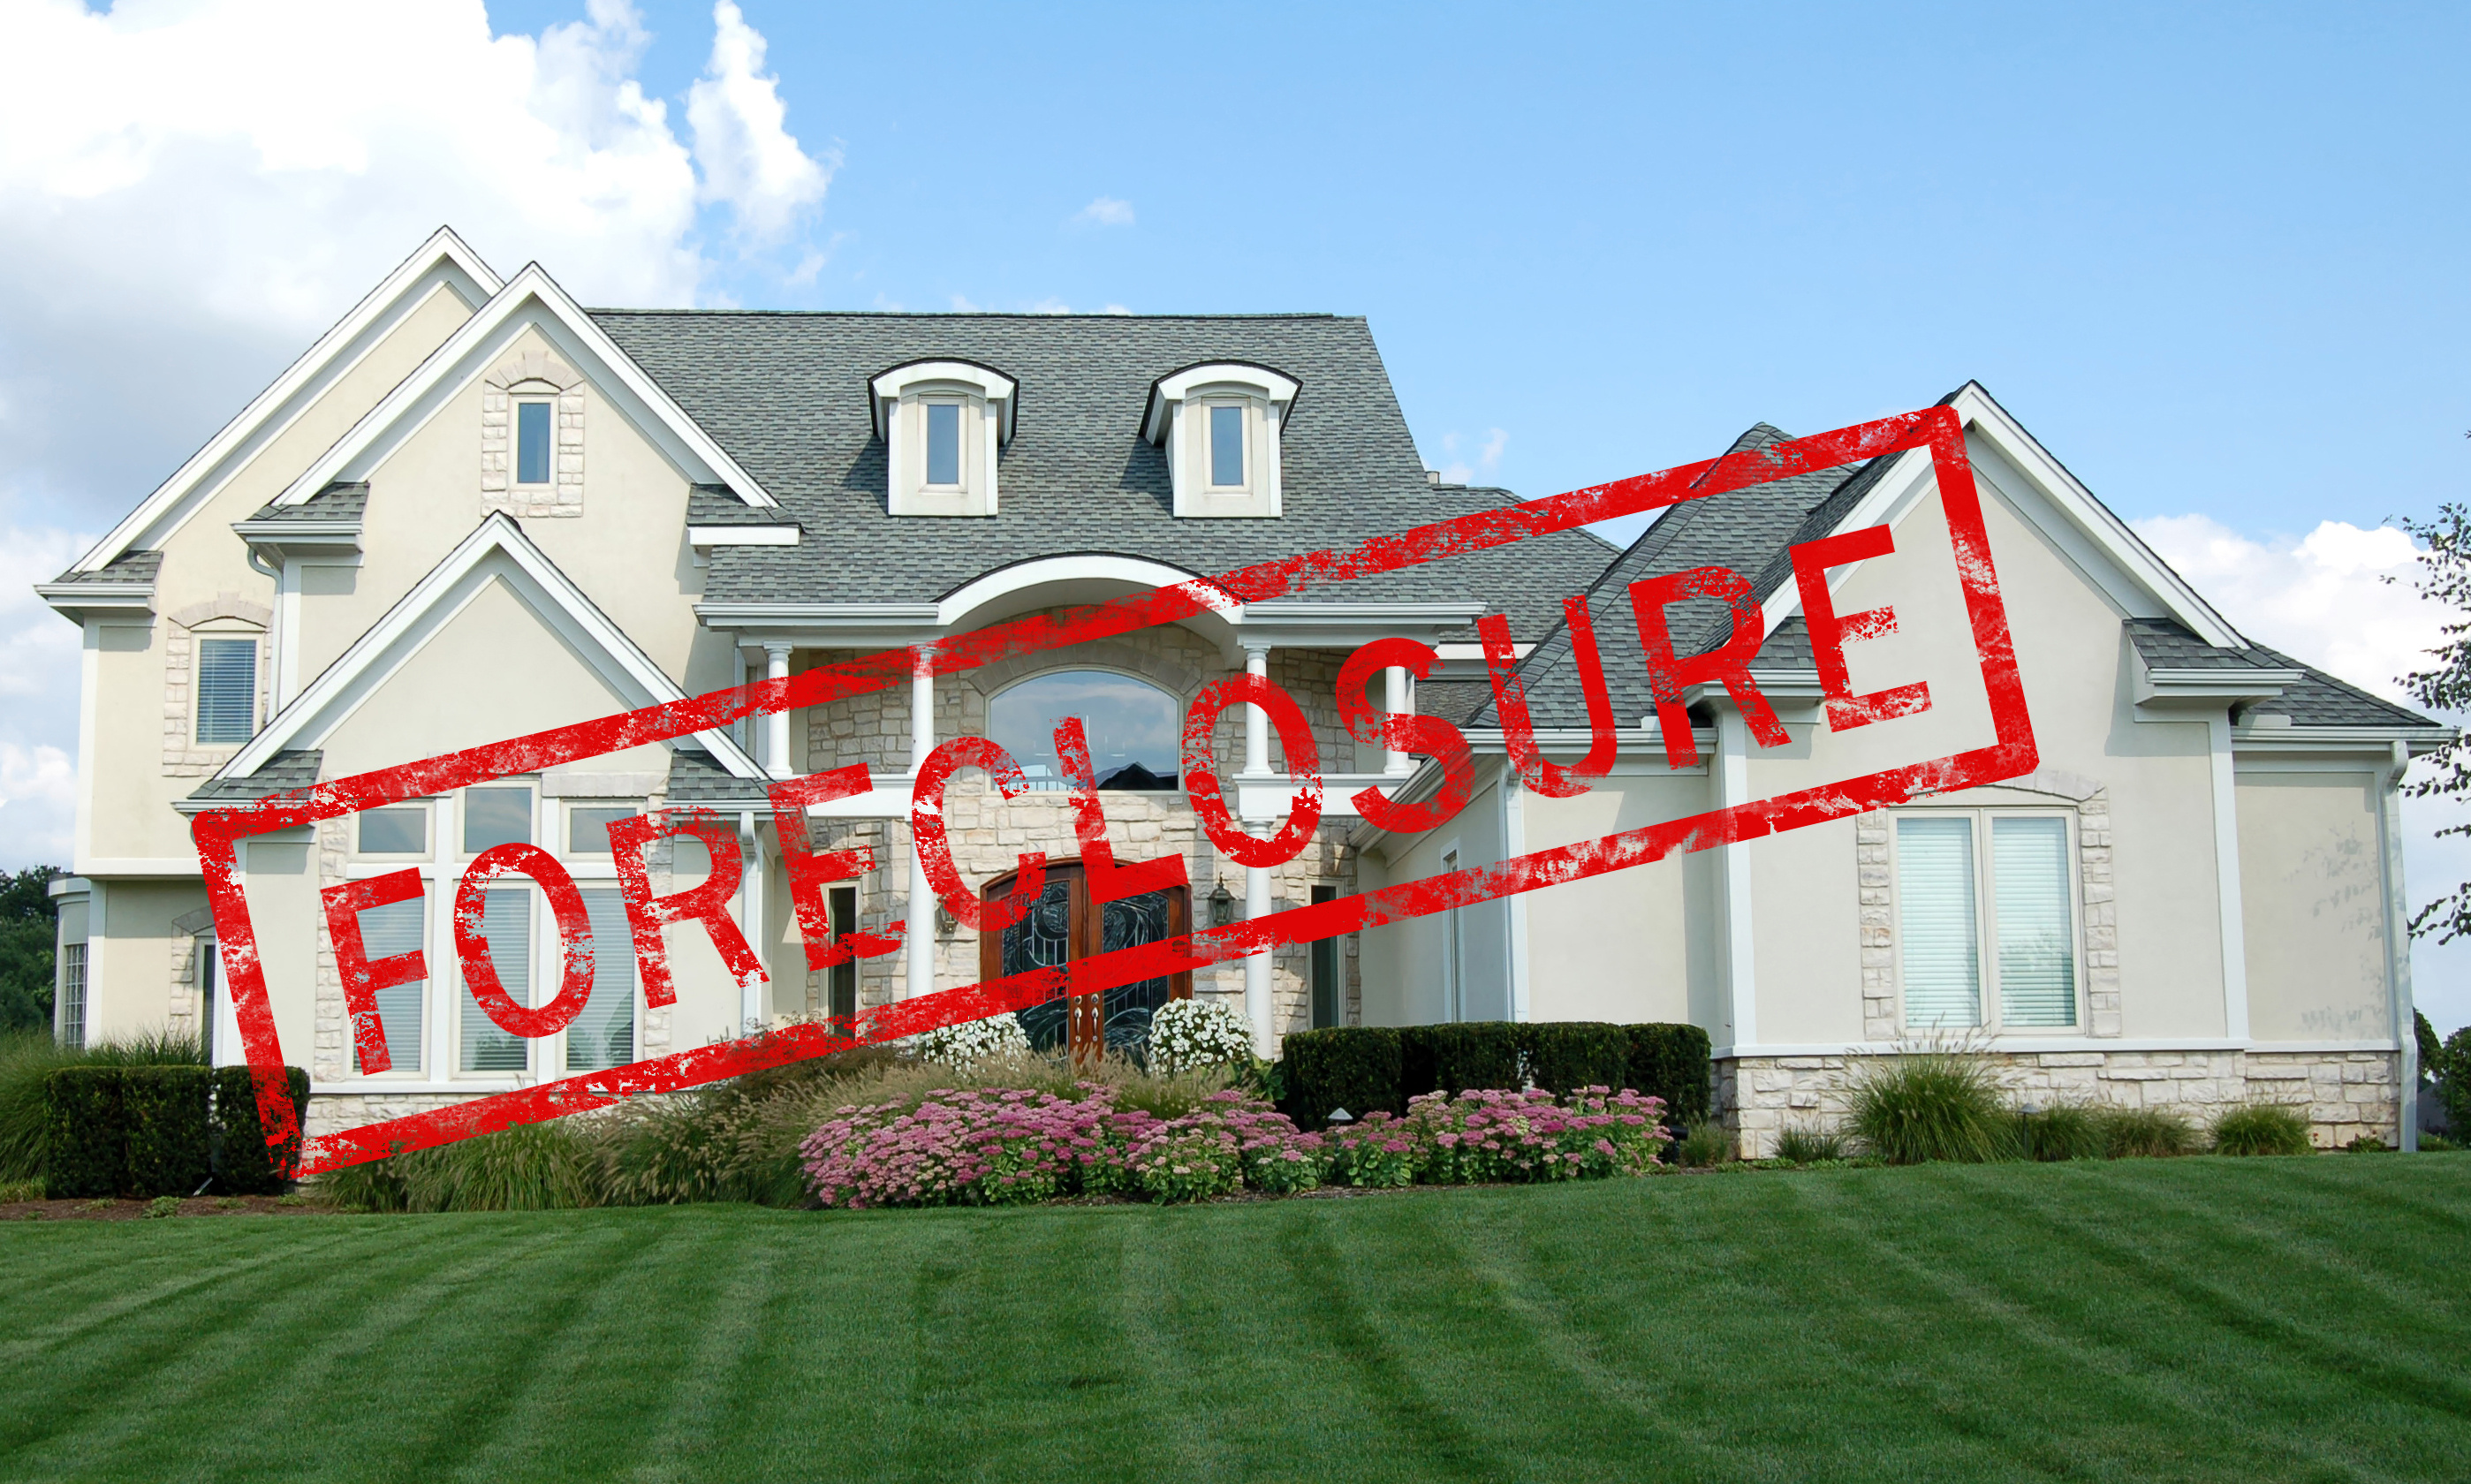 Call Real Solutions to discuss valuations pertaining to Tarrant foreclosures